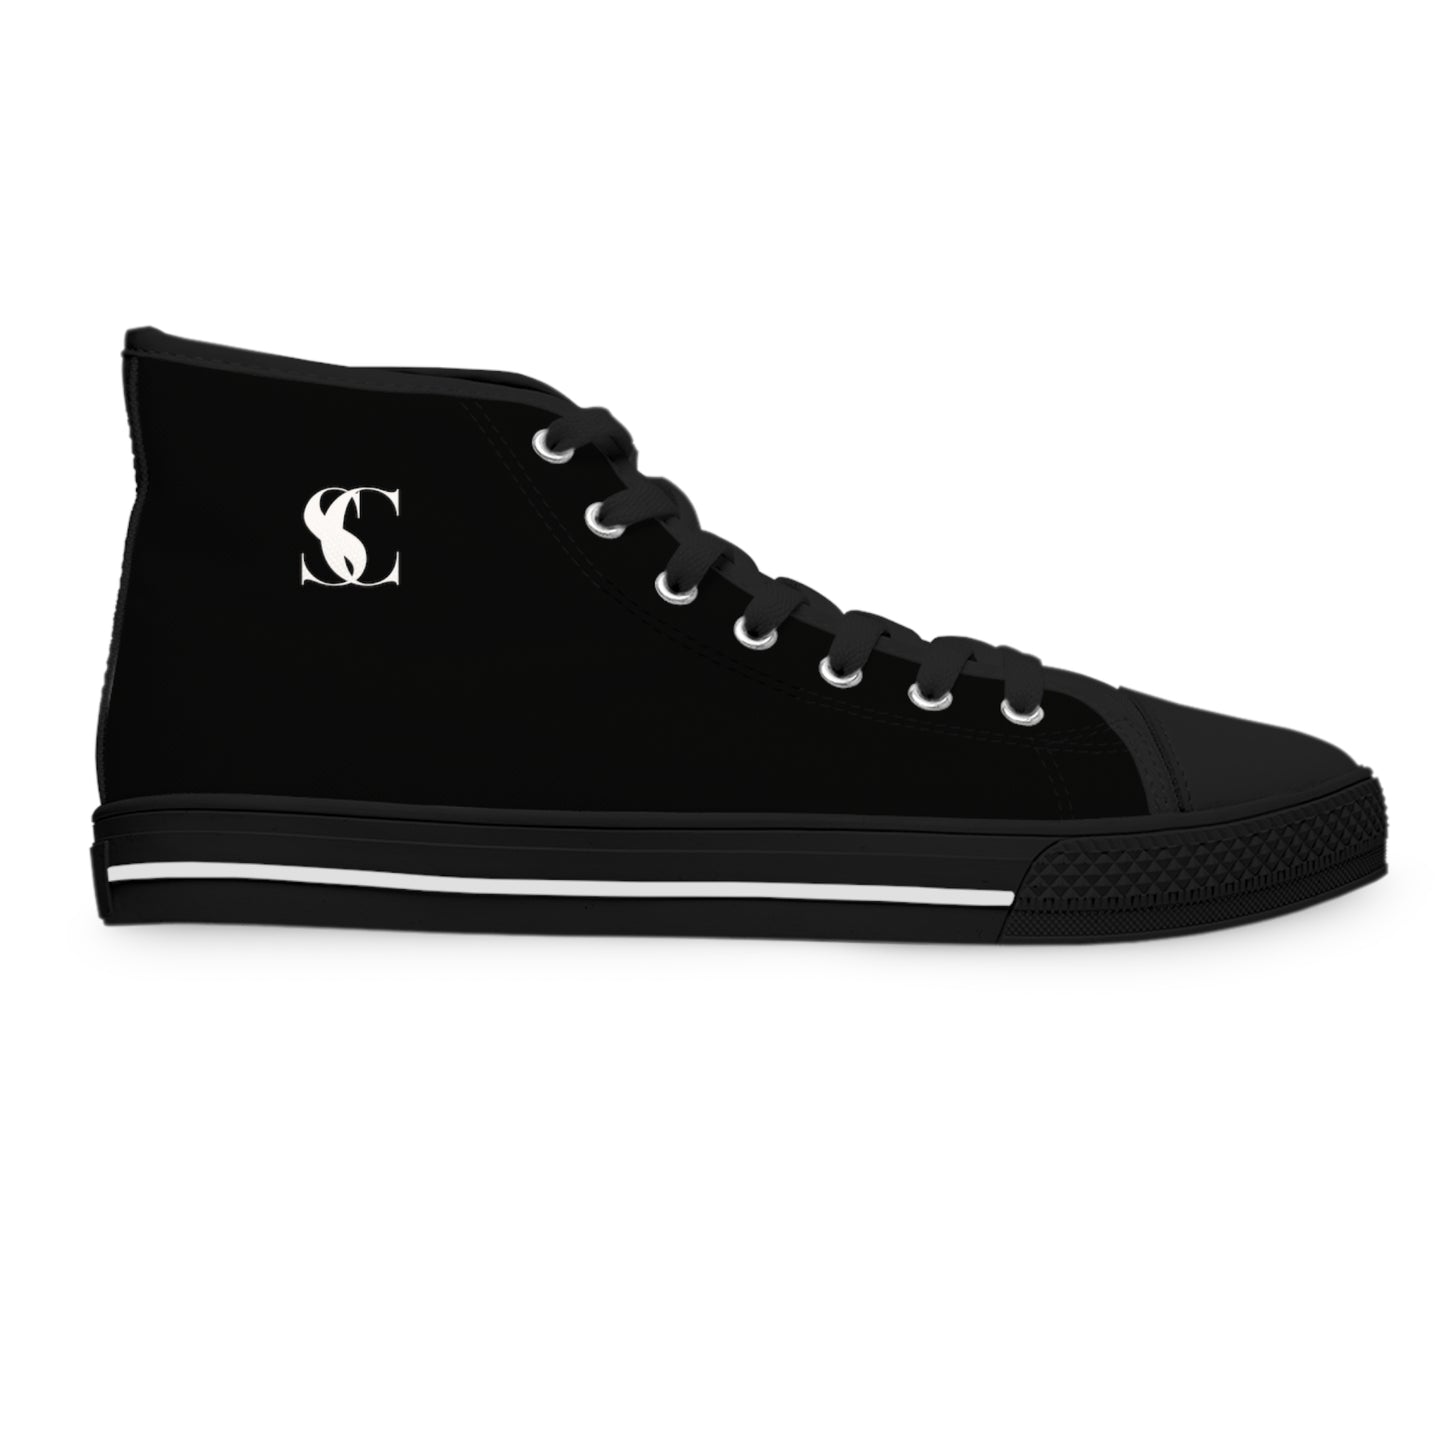 Women's SC high top Trainers